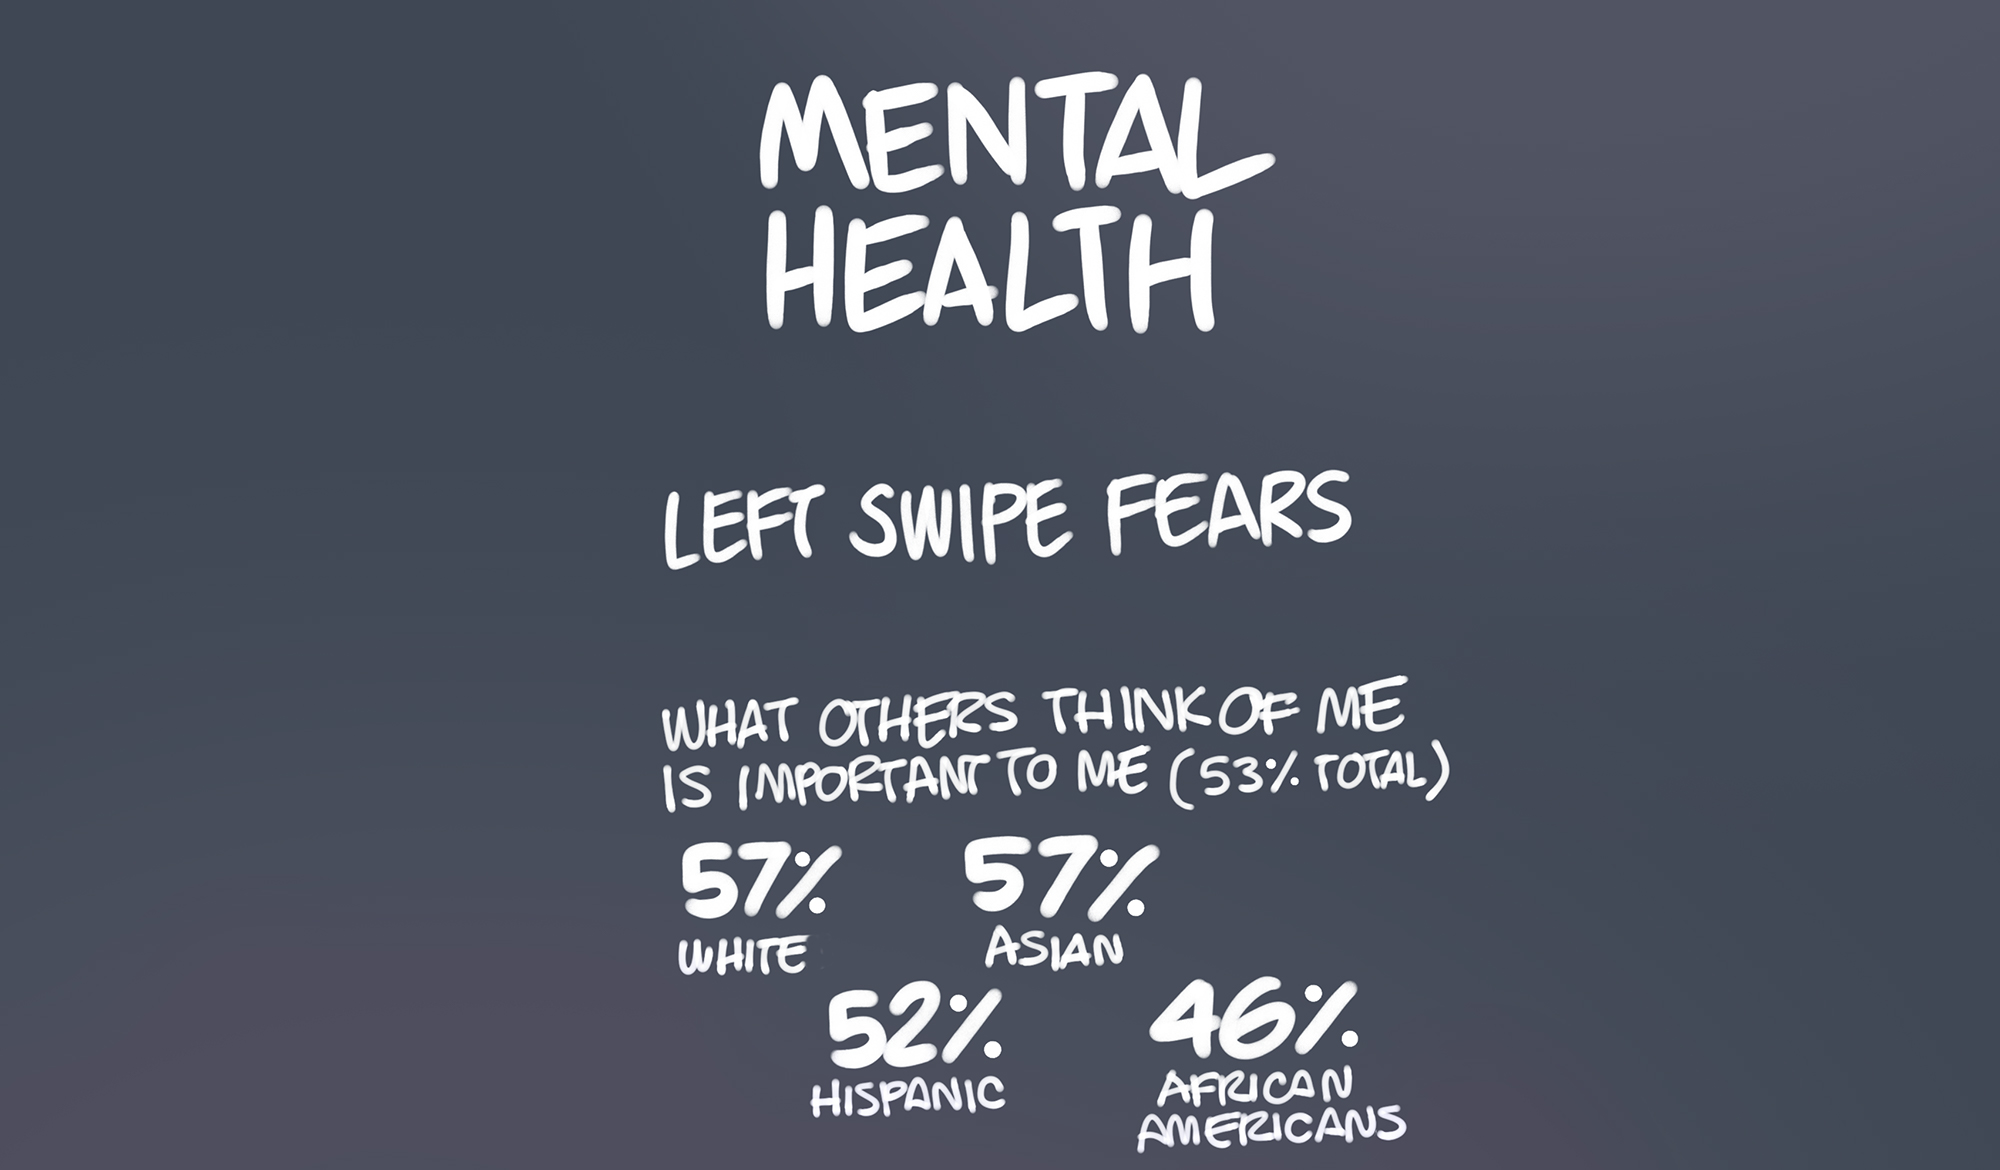 Mental health. Left swipe fears. What others think of me is important to me (53% total). 57% White. 57% Asian. 52% Hispanic. 46% African Americans.